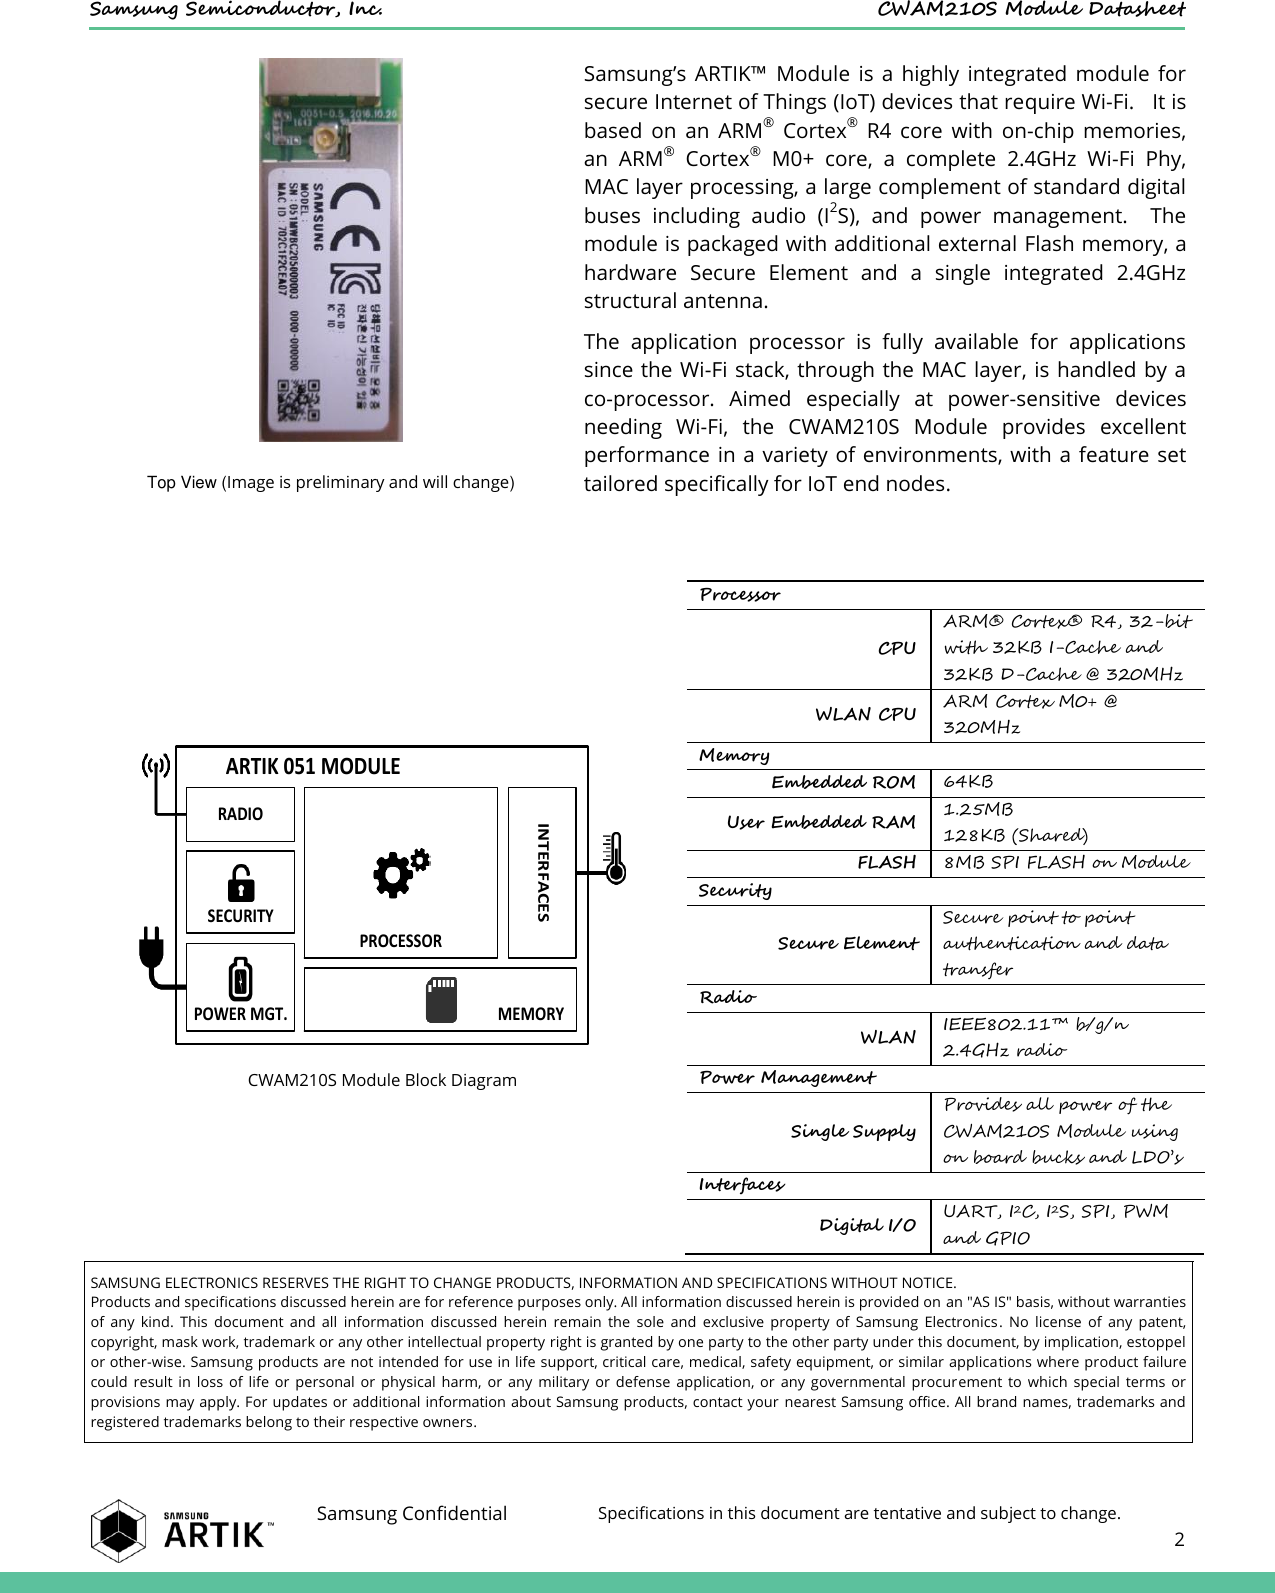    Samsung Semiconductor, Inc.  CWAM210S Module Datasheet    Samsung Confidential Specifications in this document are tentative and subject to change.  2   Samsung’s  ARTIK™  Module  is  a highly  integrated  module  for secure Internet of Things (IoT) devices that require Wi-Fi.   It is based  on  an  ARM®  Cortex®  R4  core  with  on-chip  memories, an  ARM®  Cortex®  M0+  core,  a  complete  2.4GHz  Wi-Fi  Phy, MAC layer processing, a large complement of standard digital buses  including  audio  (I2S),  and  power  management.    The module is packaged with additional external Flash memory, a hardware  Secure  Element  and  a  single  integrated  2.4GHz structural antenna. The  application  processor  is  fully  available  for  applications since the Wi-Fi stack, through the MAC layer, is handled by a co-processor.  Aimed  especially  at  power-sensitive  devices needing  Wi-Fi,  the  CWAM210S  Module  provides  excellent performance in a variety of  environments, with  a feature  set tailored specifically for IoT end nodes. Top View (Image is preliminary and will change)    CWAM210S Module Block Diagram Processor CPU ARM®  Cortex®  R4, 32-bit with 32KB I-Cache and 32KB D-Cache @ 320MHz WLAN CPU ARM Cortex M0+ @ 320MHz Memory Embedded ROM 64KB User Embedded RAM 1.25MB 128KB (Shared) FLASH 8MB SPI FLASH on Module Security Secure Element Secure point to point authentication and data transfer Radio WLAN IEEE802.11™ b/g/n 2.4GHz radio Power Management Single Supply Provides all power of the CWAM210S Module using on board bucks and LDO’s Interfaces Digital I/O UART, I2C, I2S, SPI, PWM and GPIO  SAMSUNG ELECTRONICS RESERVES THE RIGHT TO CHANGE PRODUCTS, INFORMATION AND SPECIFICATIONS WITHOUT NOTICE. Products and specifications discussed herein are for reference purposes only. All information discussed herein is provided on an &quot;AS IS&quot; basis, without warranties of  any  kind.  This  document  and  all  information  discussed  herein  remain  the  sole  and  exclusive  property  of  Samsung  Electronics.  No  license  of  any  patent, copyright, mask work, trademark or any other intellectual property right is granted by one party to the other party under this document, by implication, estoppel or other-wise. Samsung products are not intended for use in life support, critical care, medical, safety equipment, or similar applications where product failure could  result  in  loss  of  life  or  personal  or  physical  harm,  or  any  military  or  defense  application,  or  any  governmental  procurement  to  which  special  terms  or provisions may apply. For updates or additional information about Samsung products, contact your  nearest Samsung office. All brand names, trademarks and registered trademarks belong to their respective owners. ARTIK 051 MODULERADIOSECURITYPROCESSORPOWER MGT. MEMORYINTERFACES